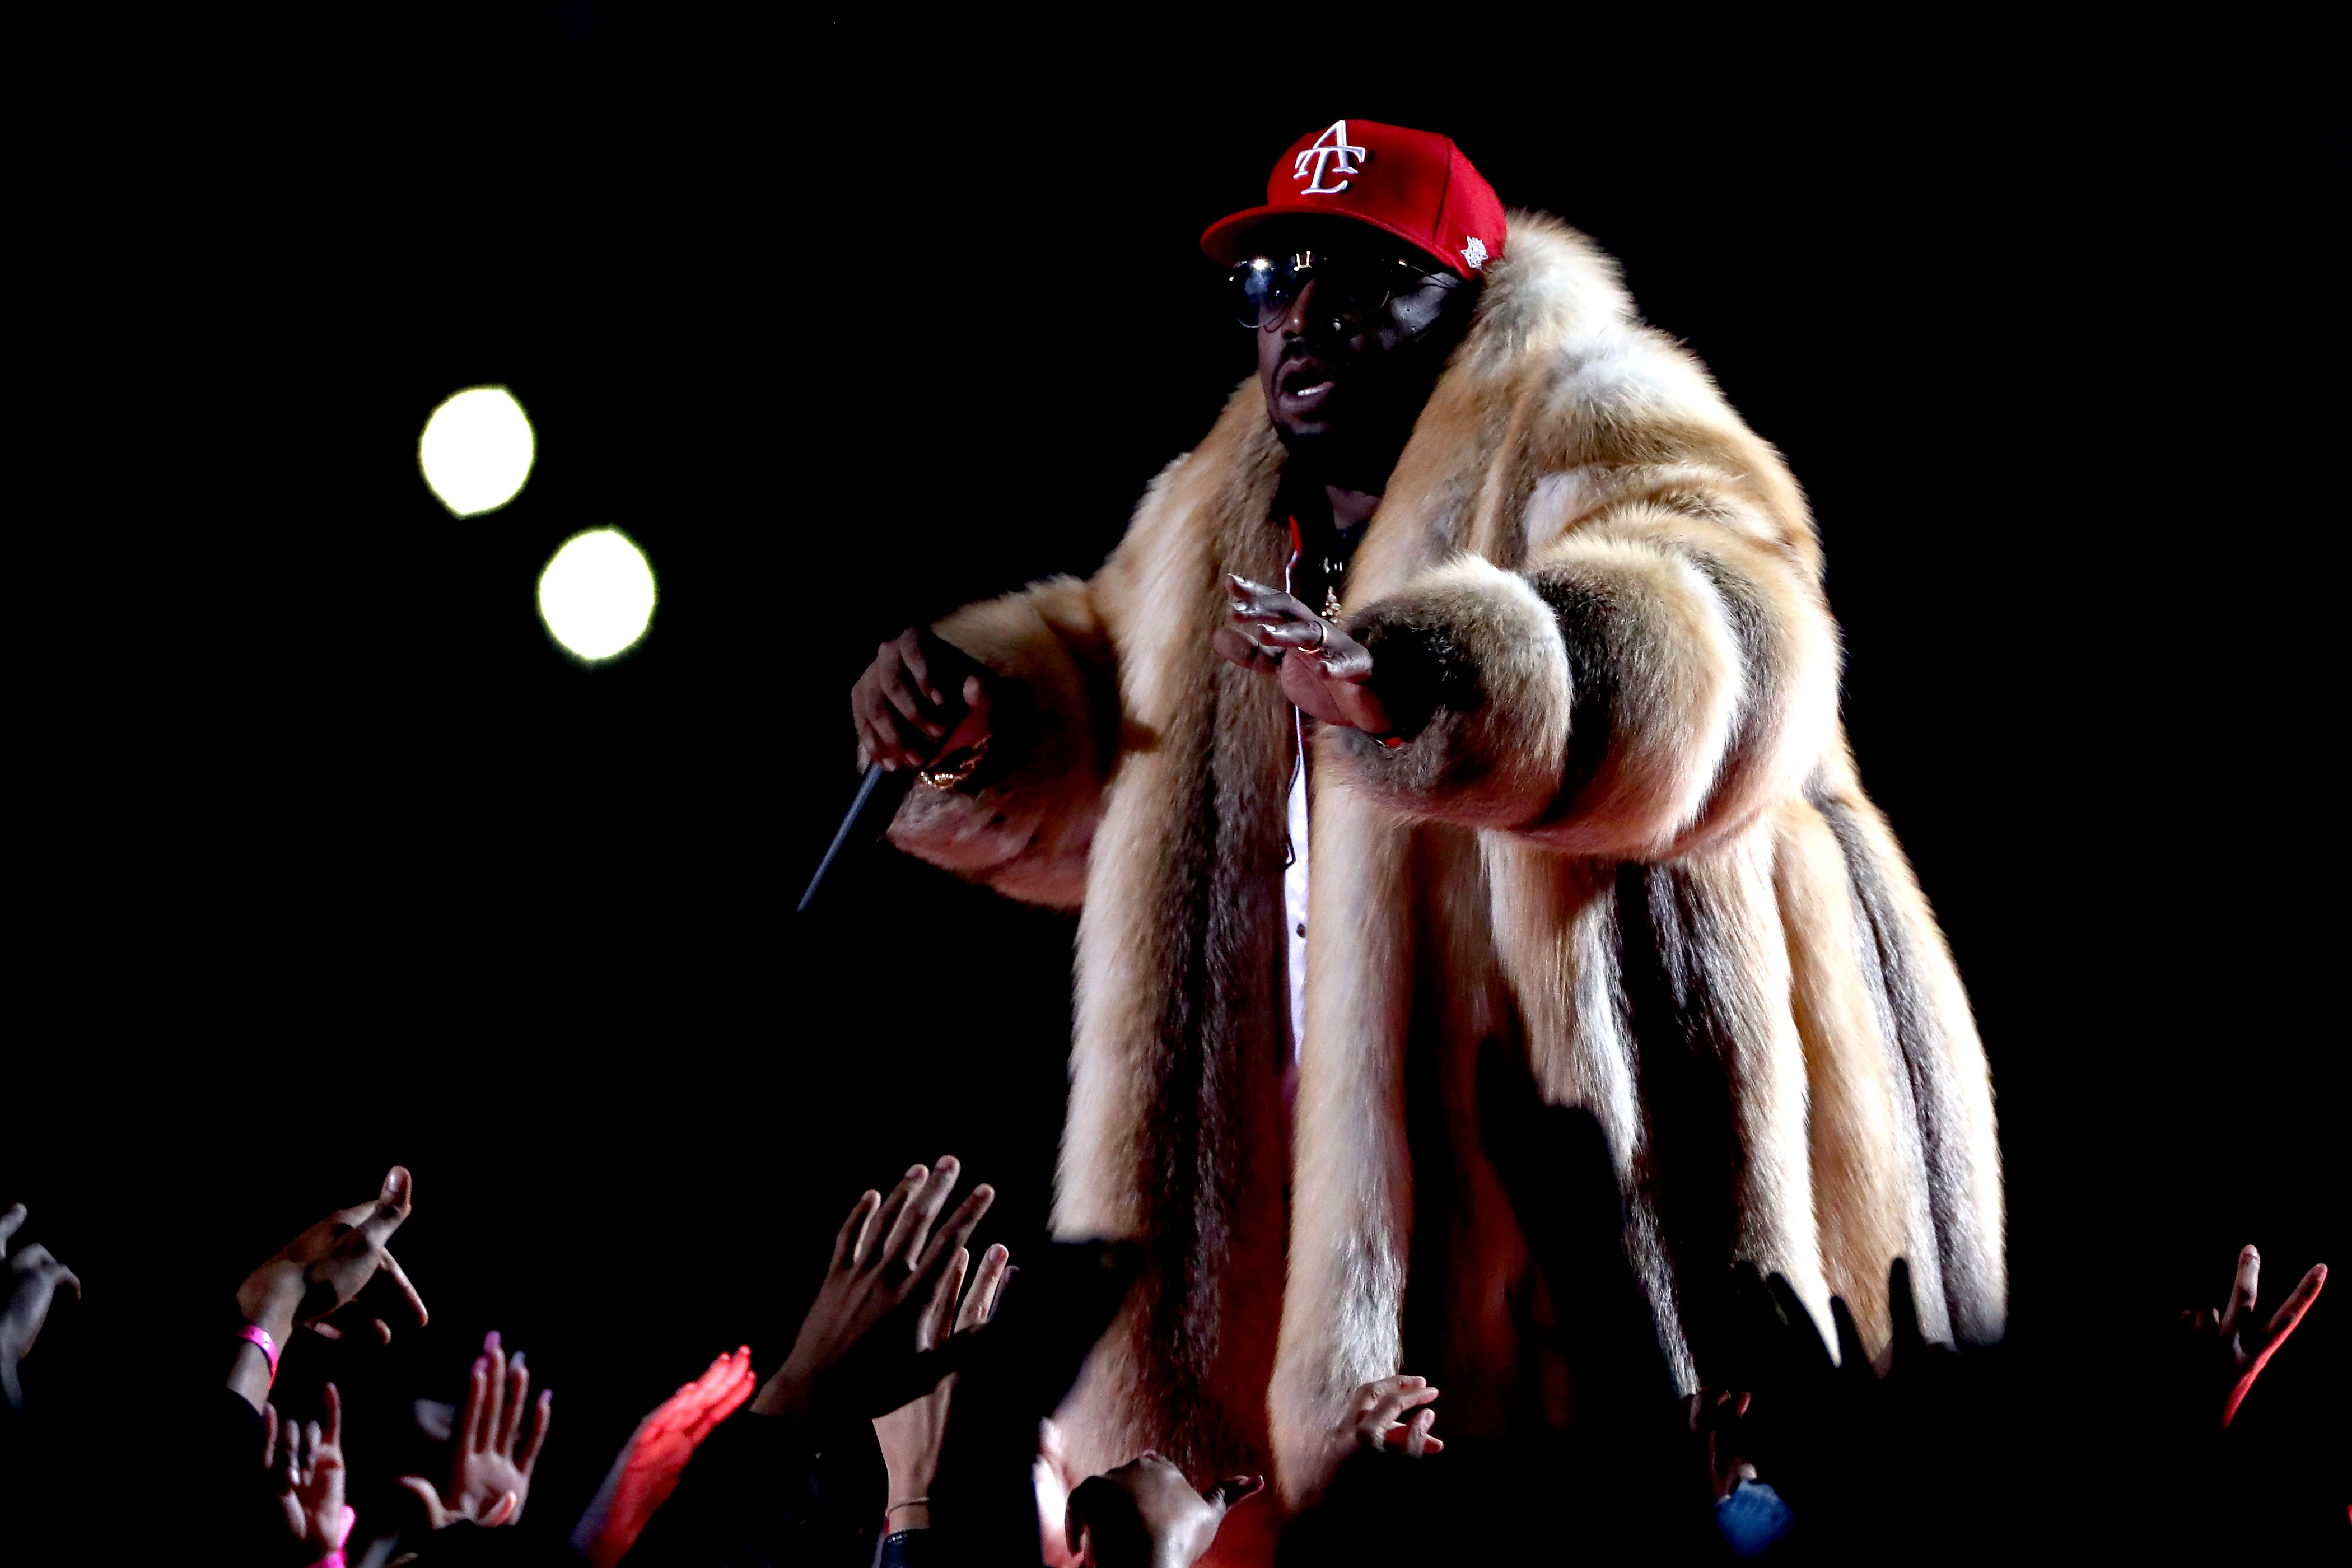 Dawg, they should do dis for every Braves game… #bigboi #outkast